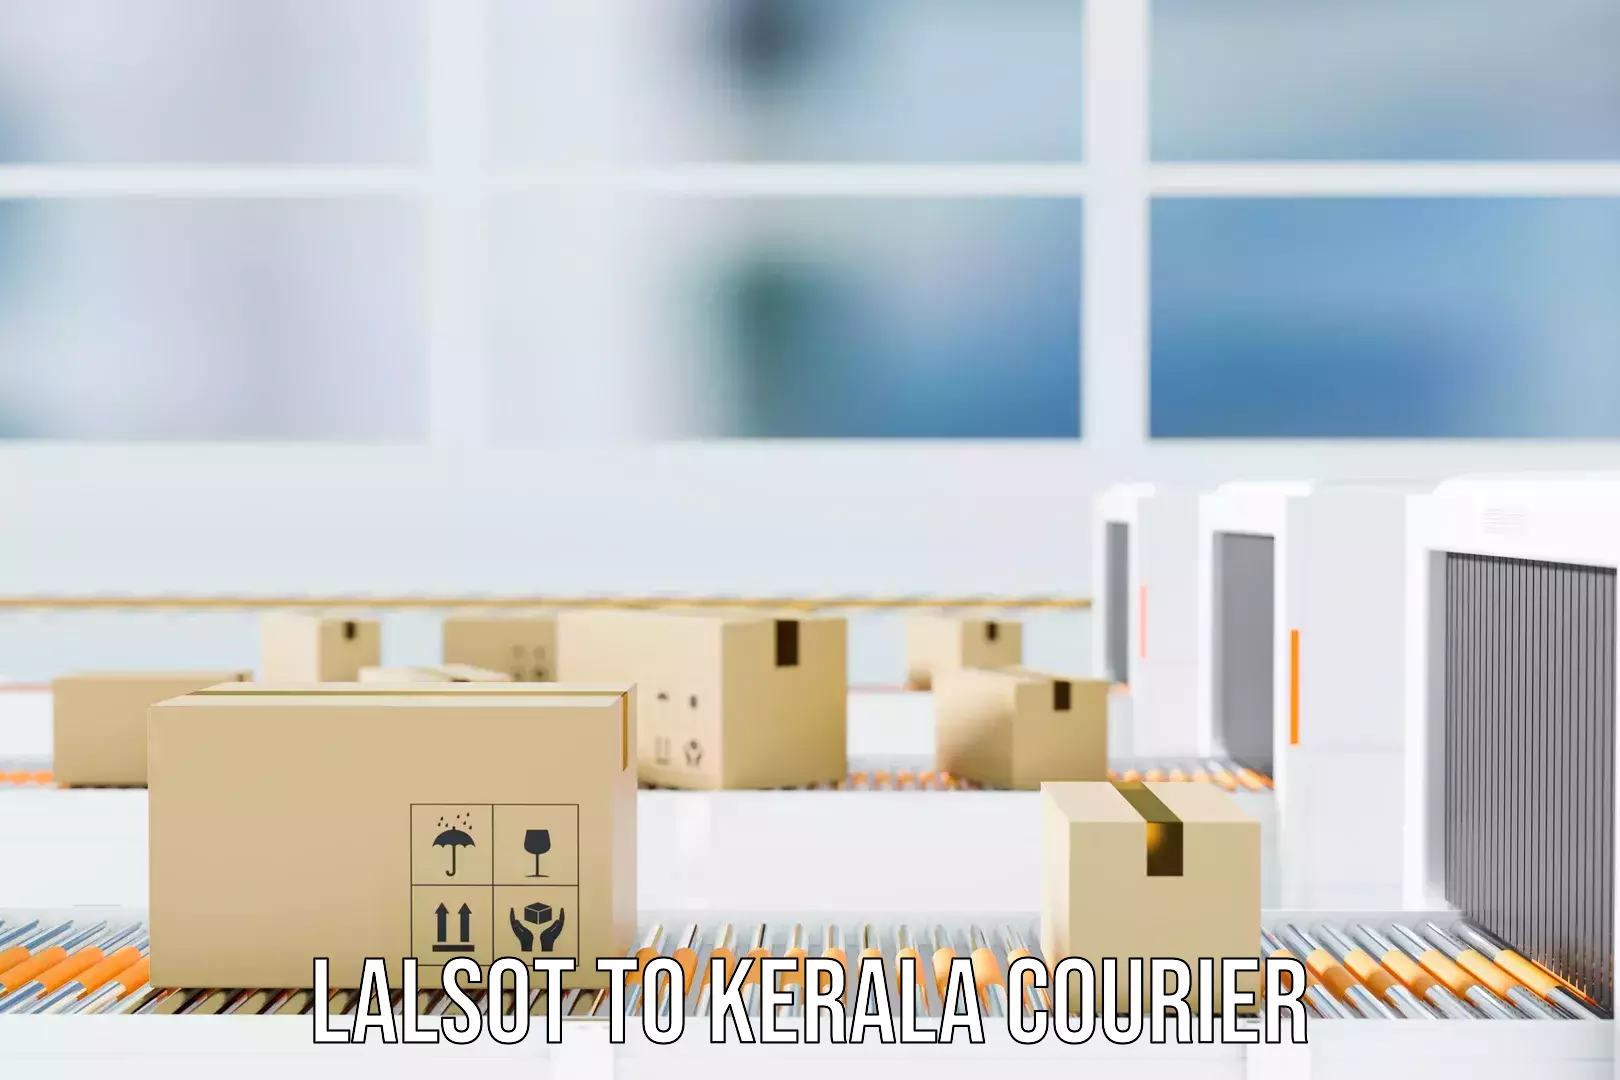 Luggage transport company Lalsot to Kerala